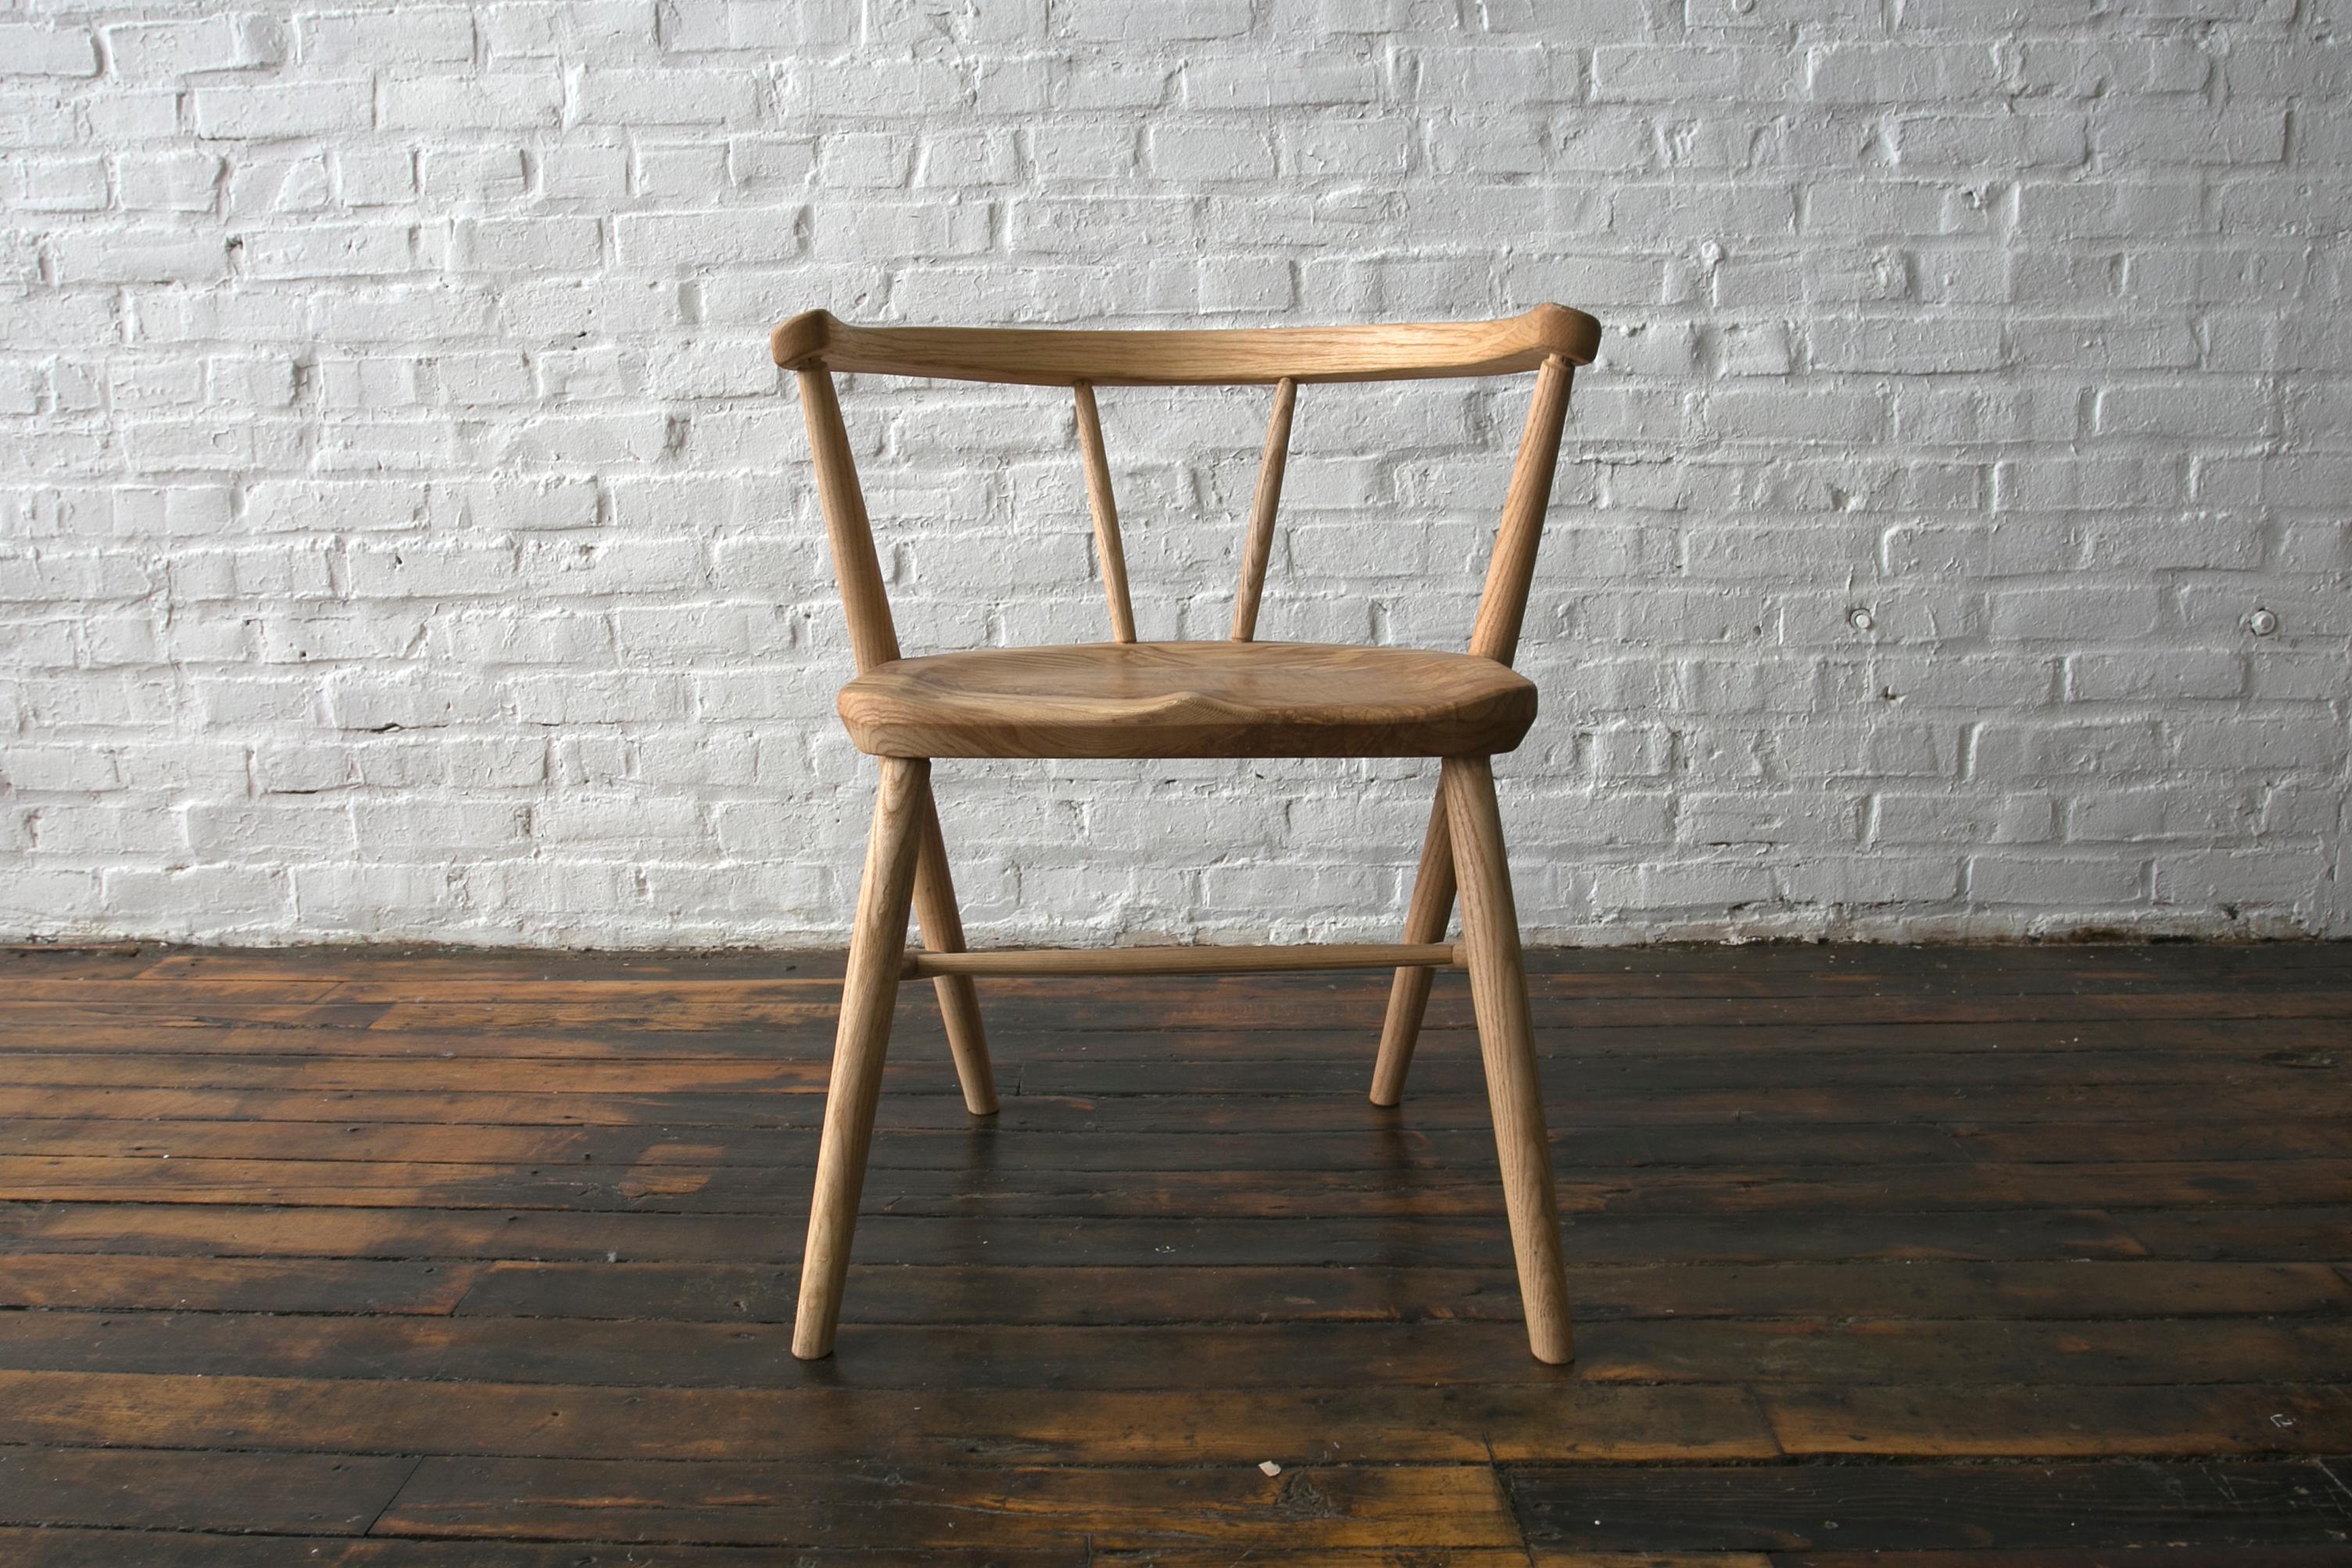 We spent months designing and perfecting the Yarrow Dining Chair. Our goal was to make a comfortable, elegant chair that would greet a large spectrum of different bodies. We want this chair to warm up a room, to feel like it’s part of the family.